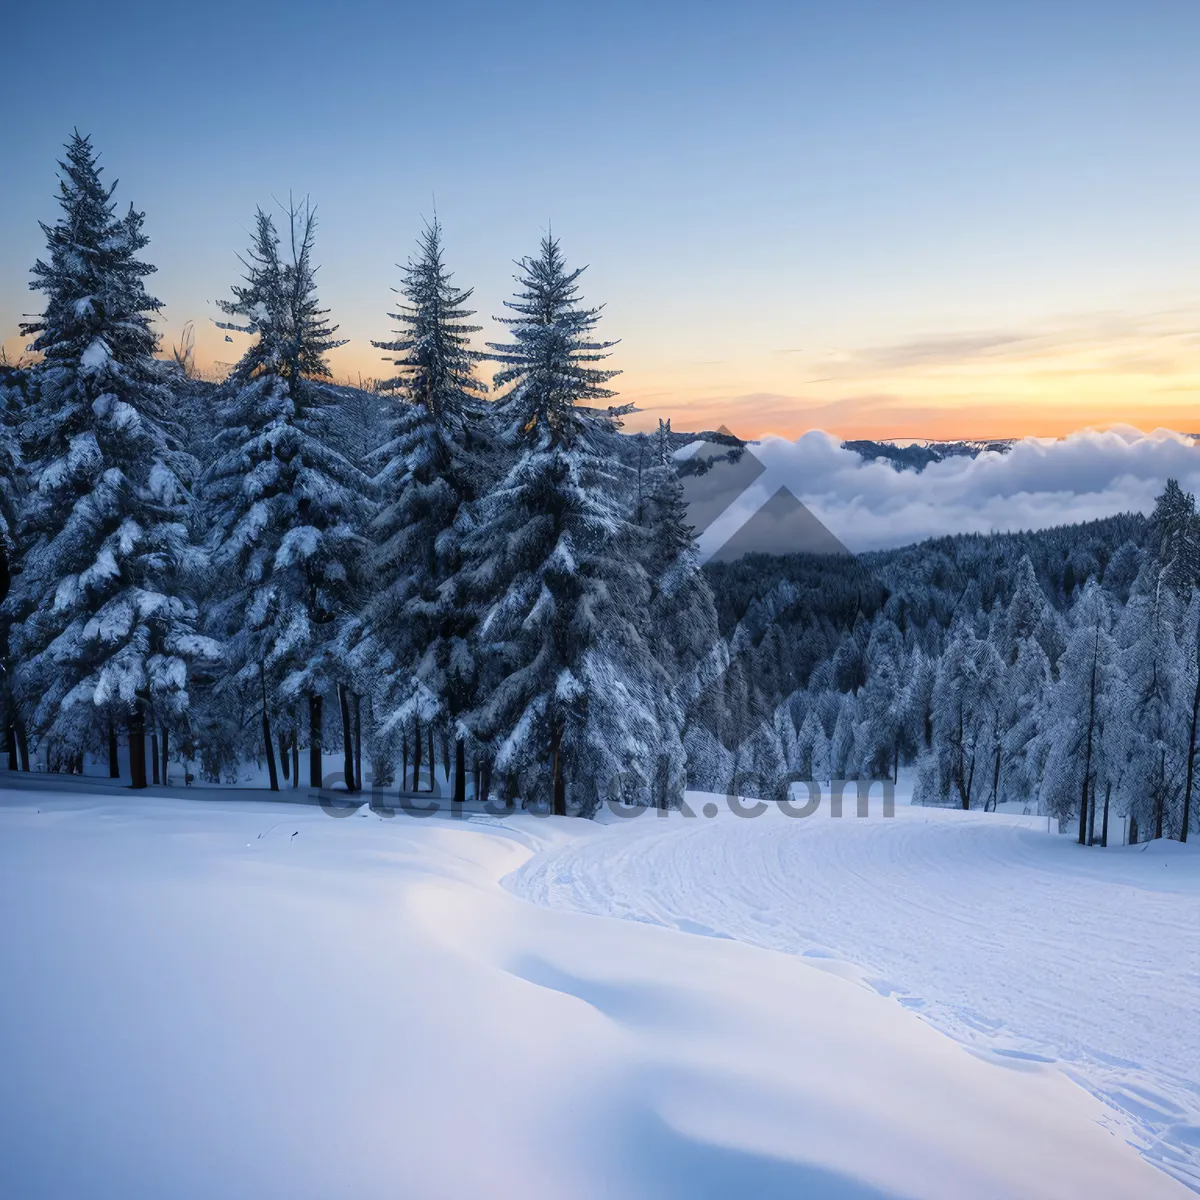 Picture of Wintry Wonderland: Majestic Snow-Covered Mountain Landscape